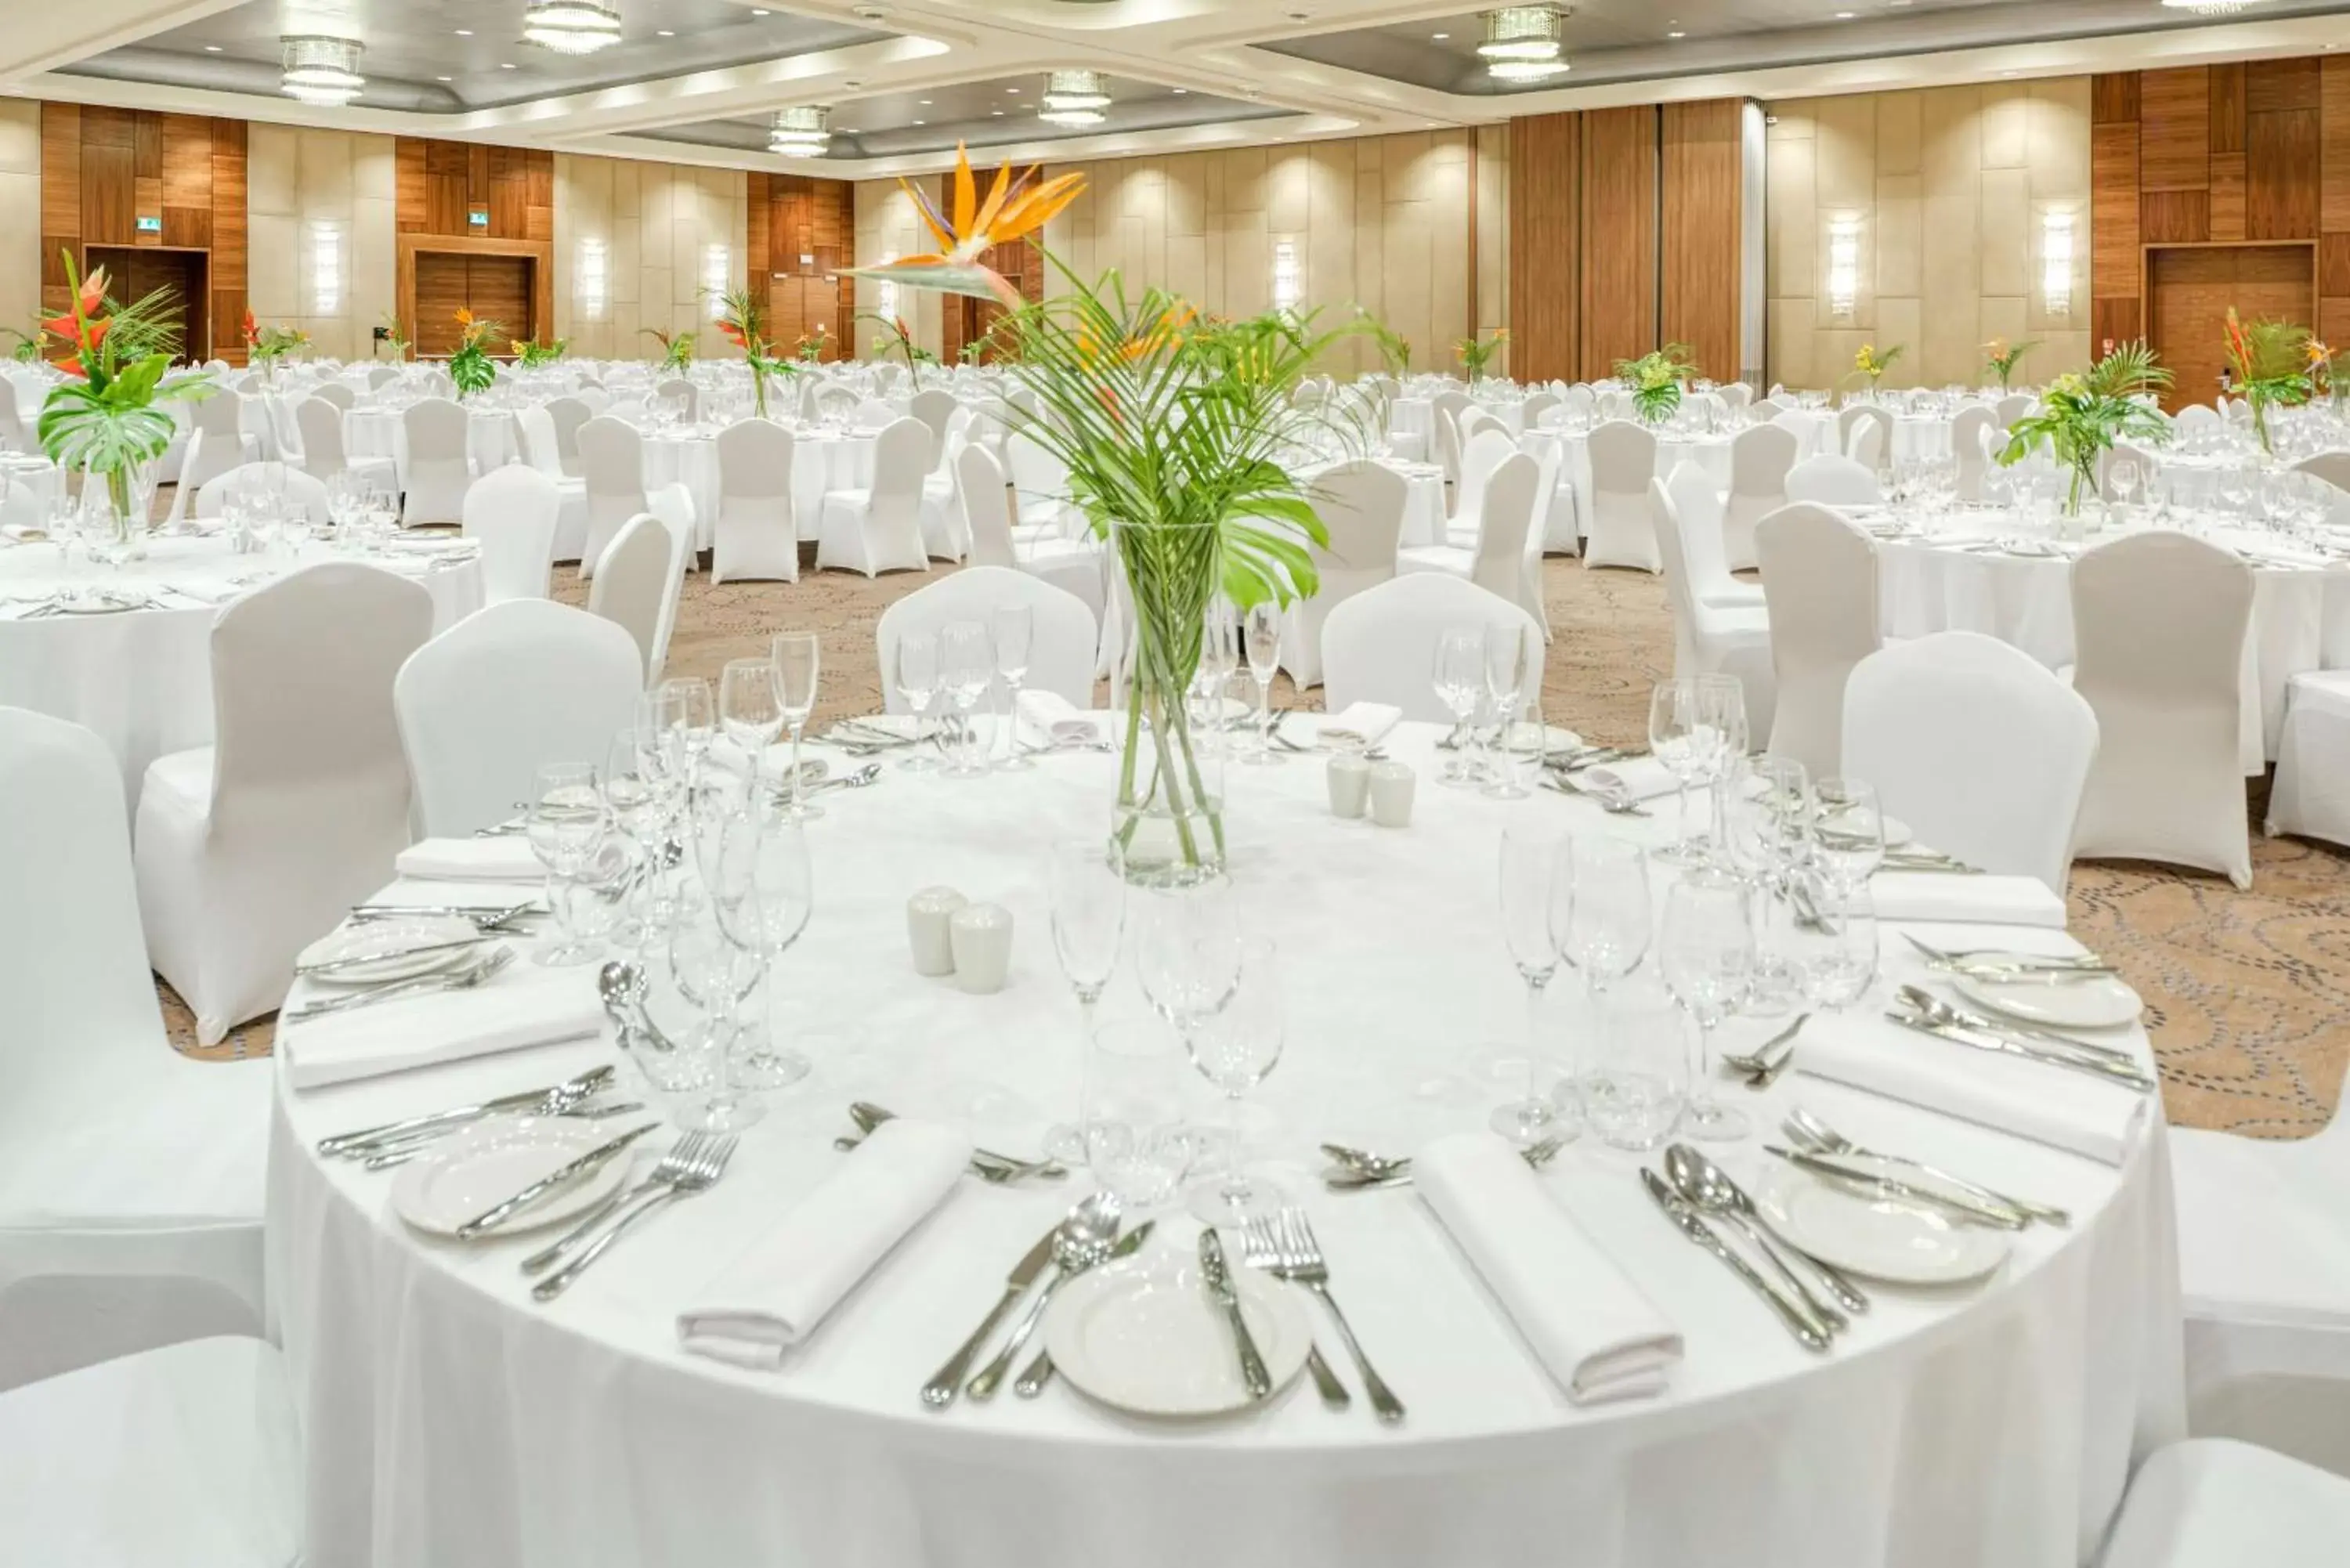 Meeting/conference room, Banquet Facilities in DoubleTree by Hilton Krakow Hotel & Convention Center